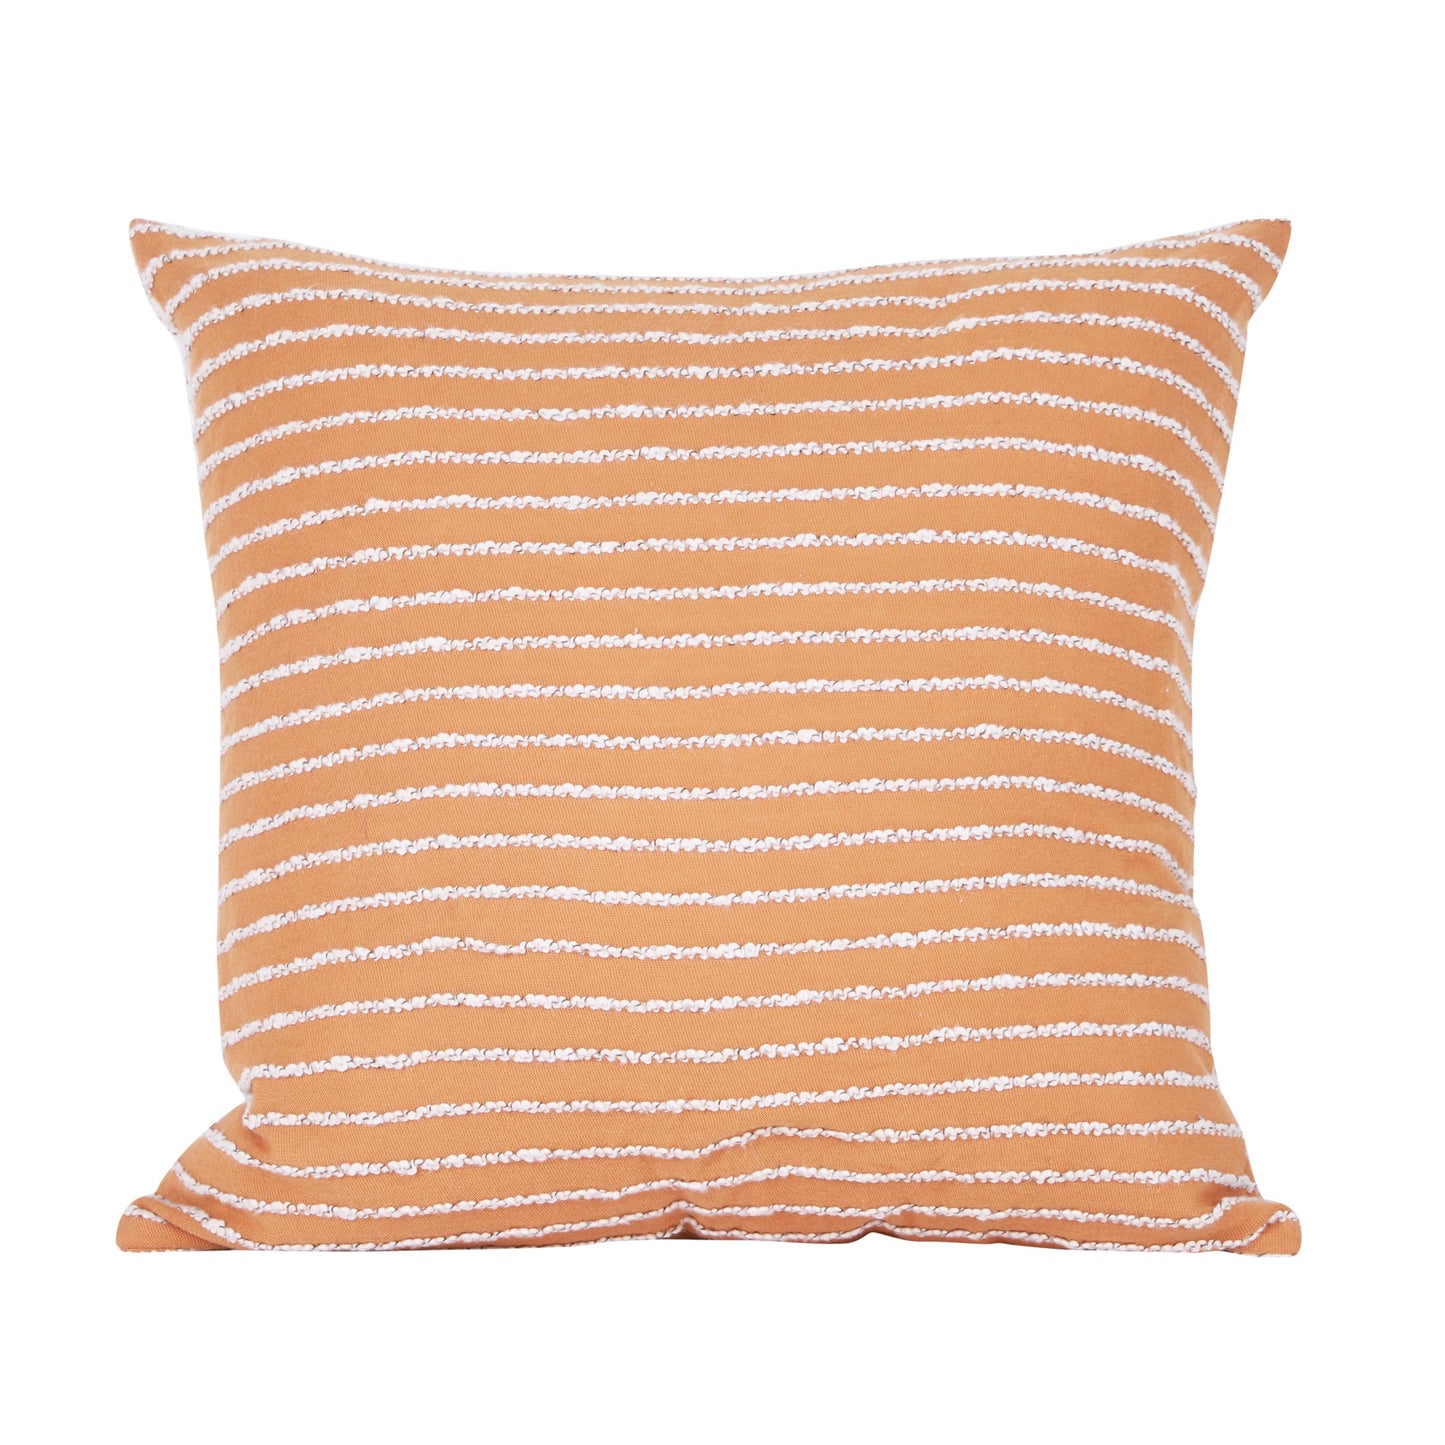 NUEVOSGHAR 100% Cotton Cushion Cover | Interwoven Horizontal Stripe Cushion Cover|Square Cushion for Bedroom,Living Room, Sofa, Office |Home Decorative Cushion | 18x18 Inch_ Ivory/Mustard